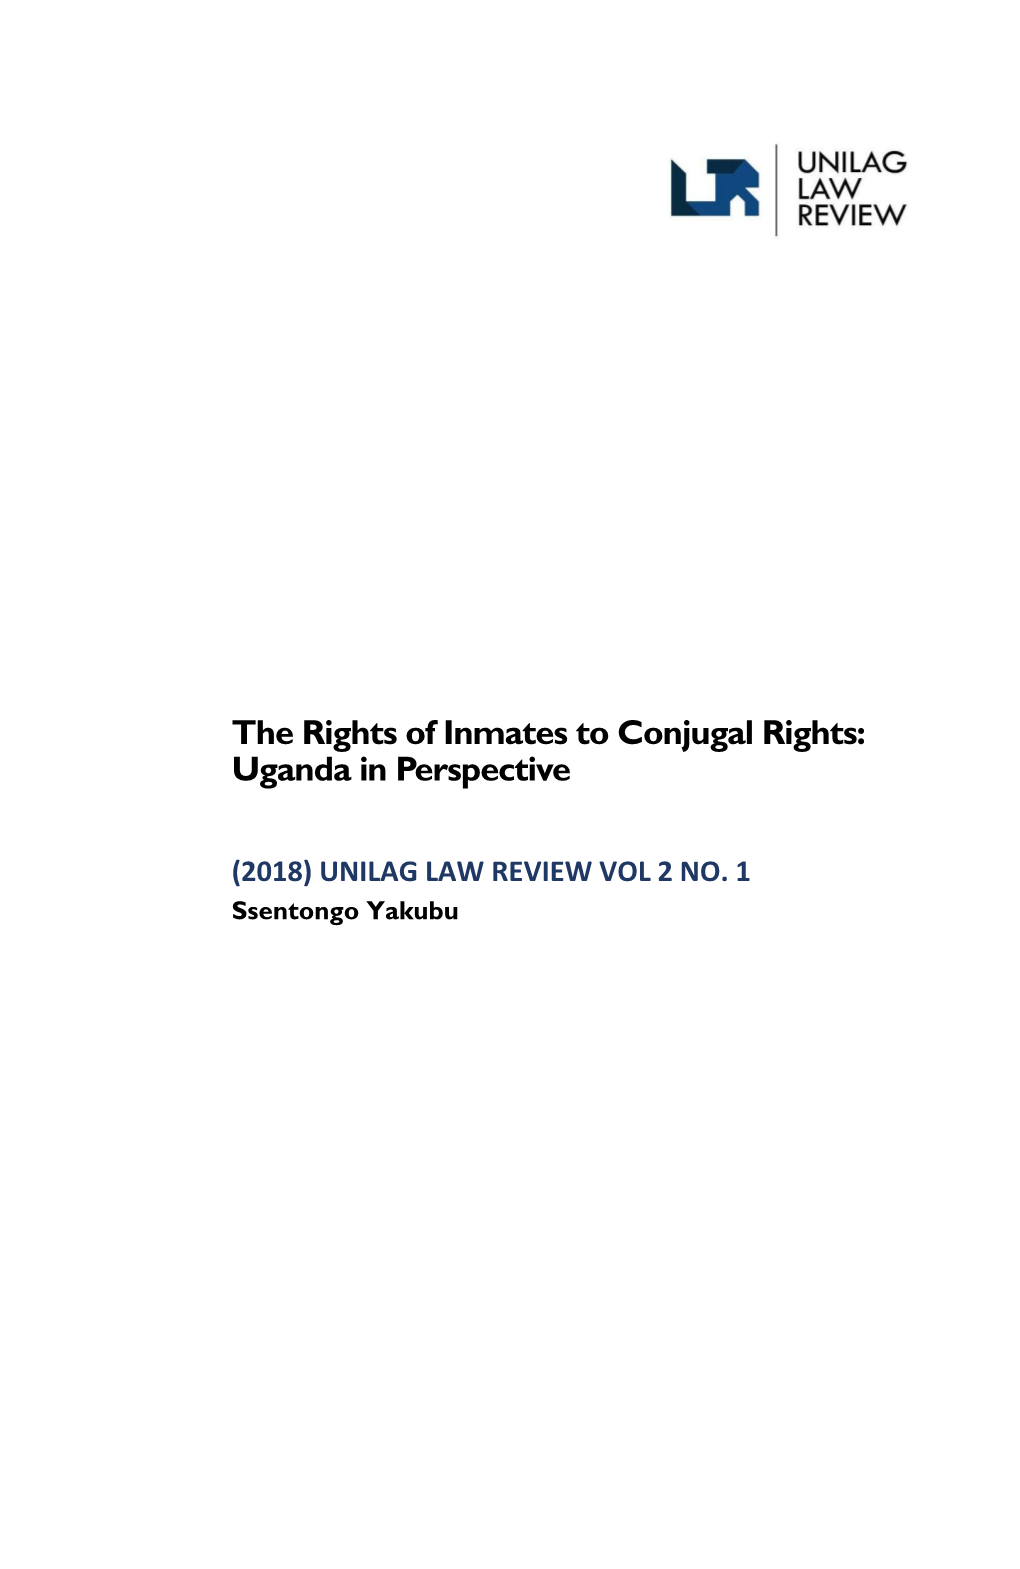 The Rights of Inmates to Conjugal Rights: Uganda in Perspective